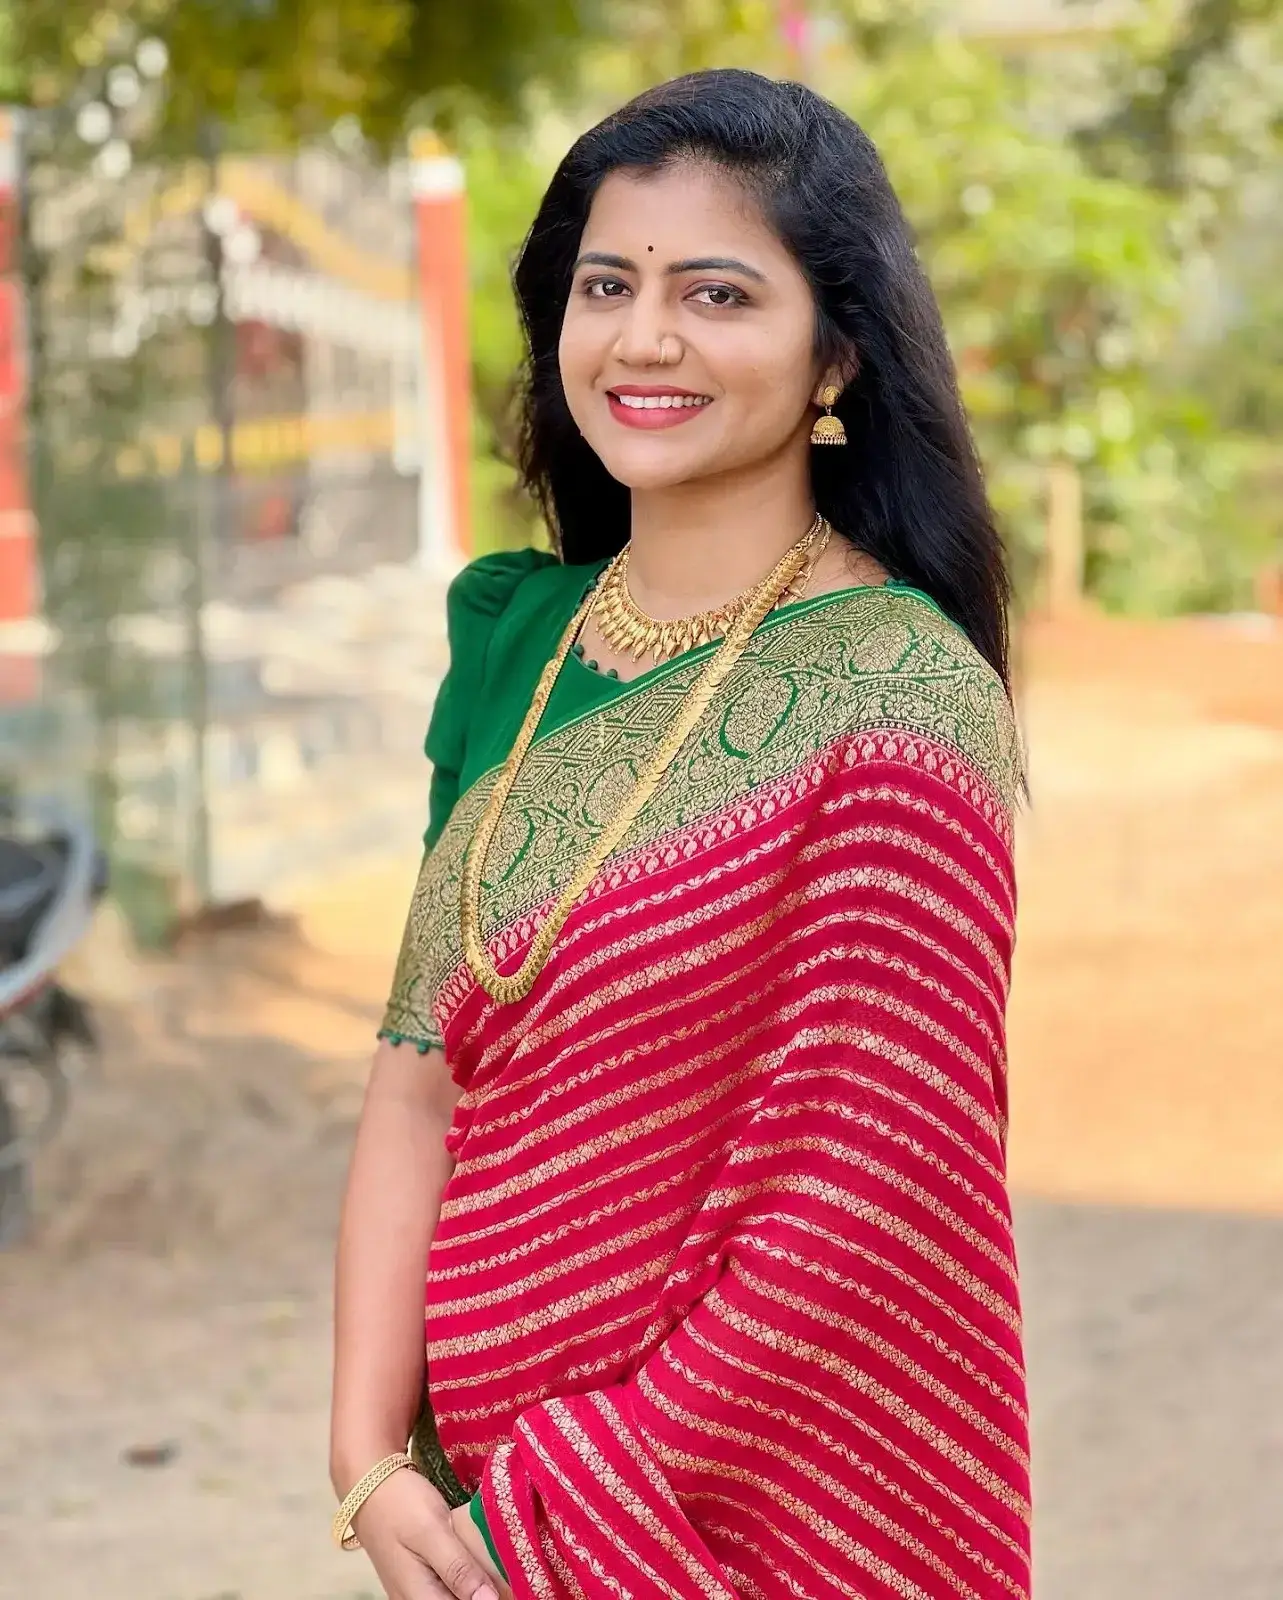 INDIAN TV ACTRESS SHIVA JYOTHI IMAGES IN TRADITIONAL RED SAREE 1